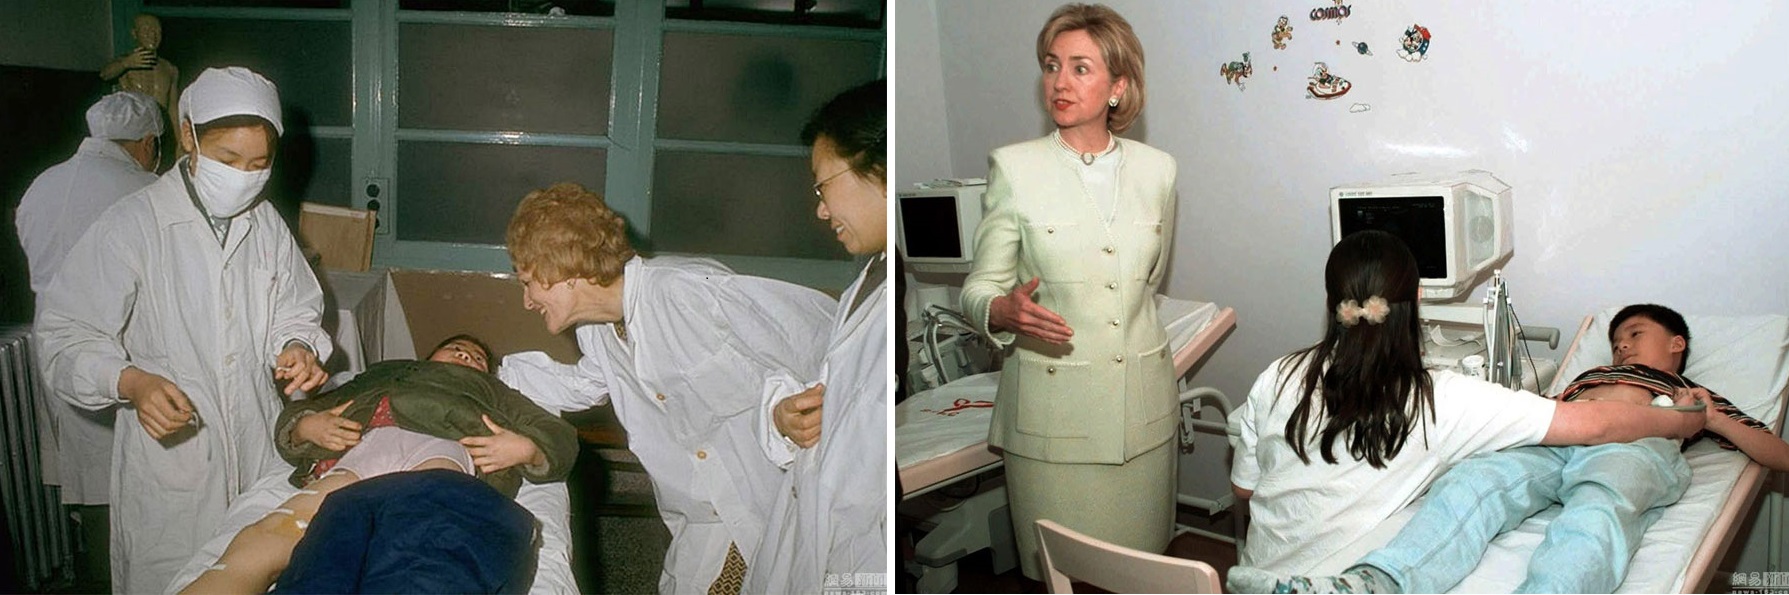 China's modernization is exemplified in images of Pat Nixon's visit to a children's hospital there in 1972, and one made by Hillary Clinton there in 1998. (english.cri.cn)